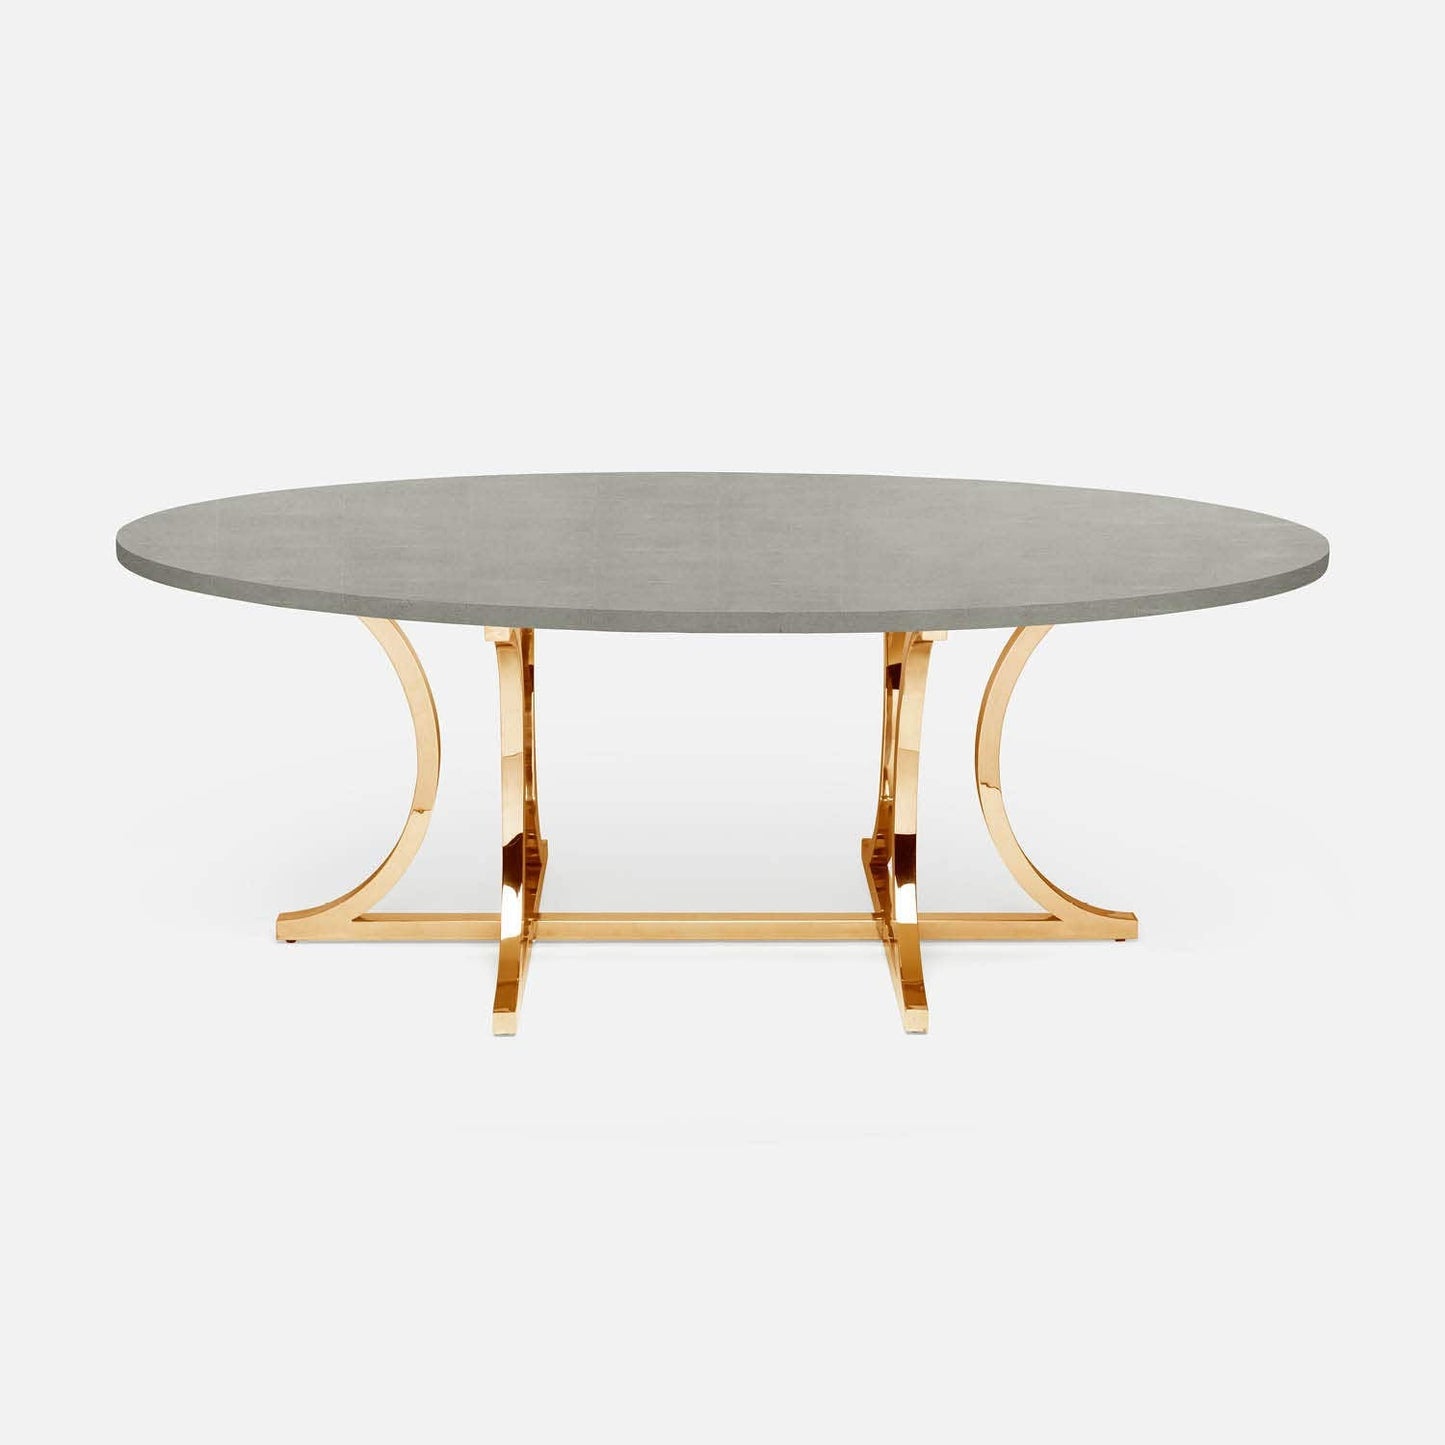 Made Goods Leighton 96" x 44" x 30" Polished Gold Steel Dinning Table With Oval Castor Gray Vintage Faux Shagreen Table Top